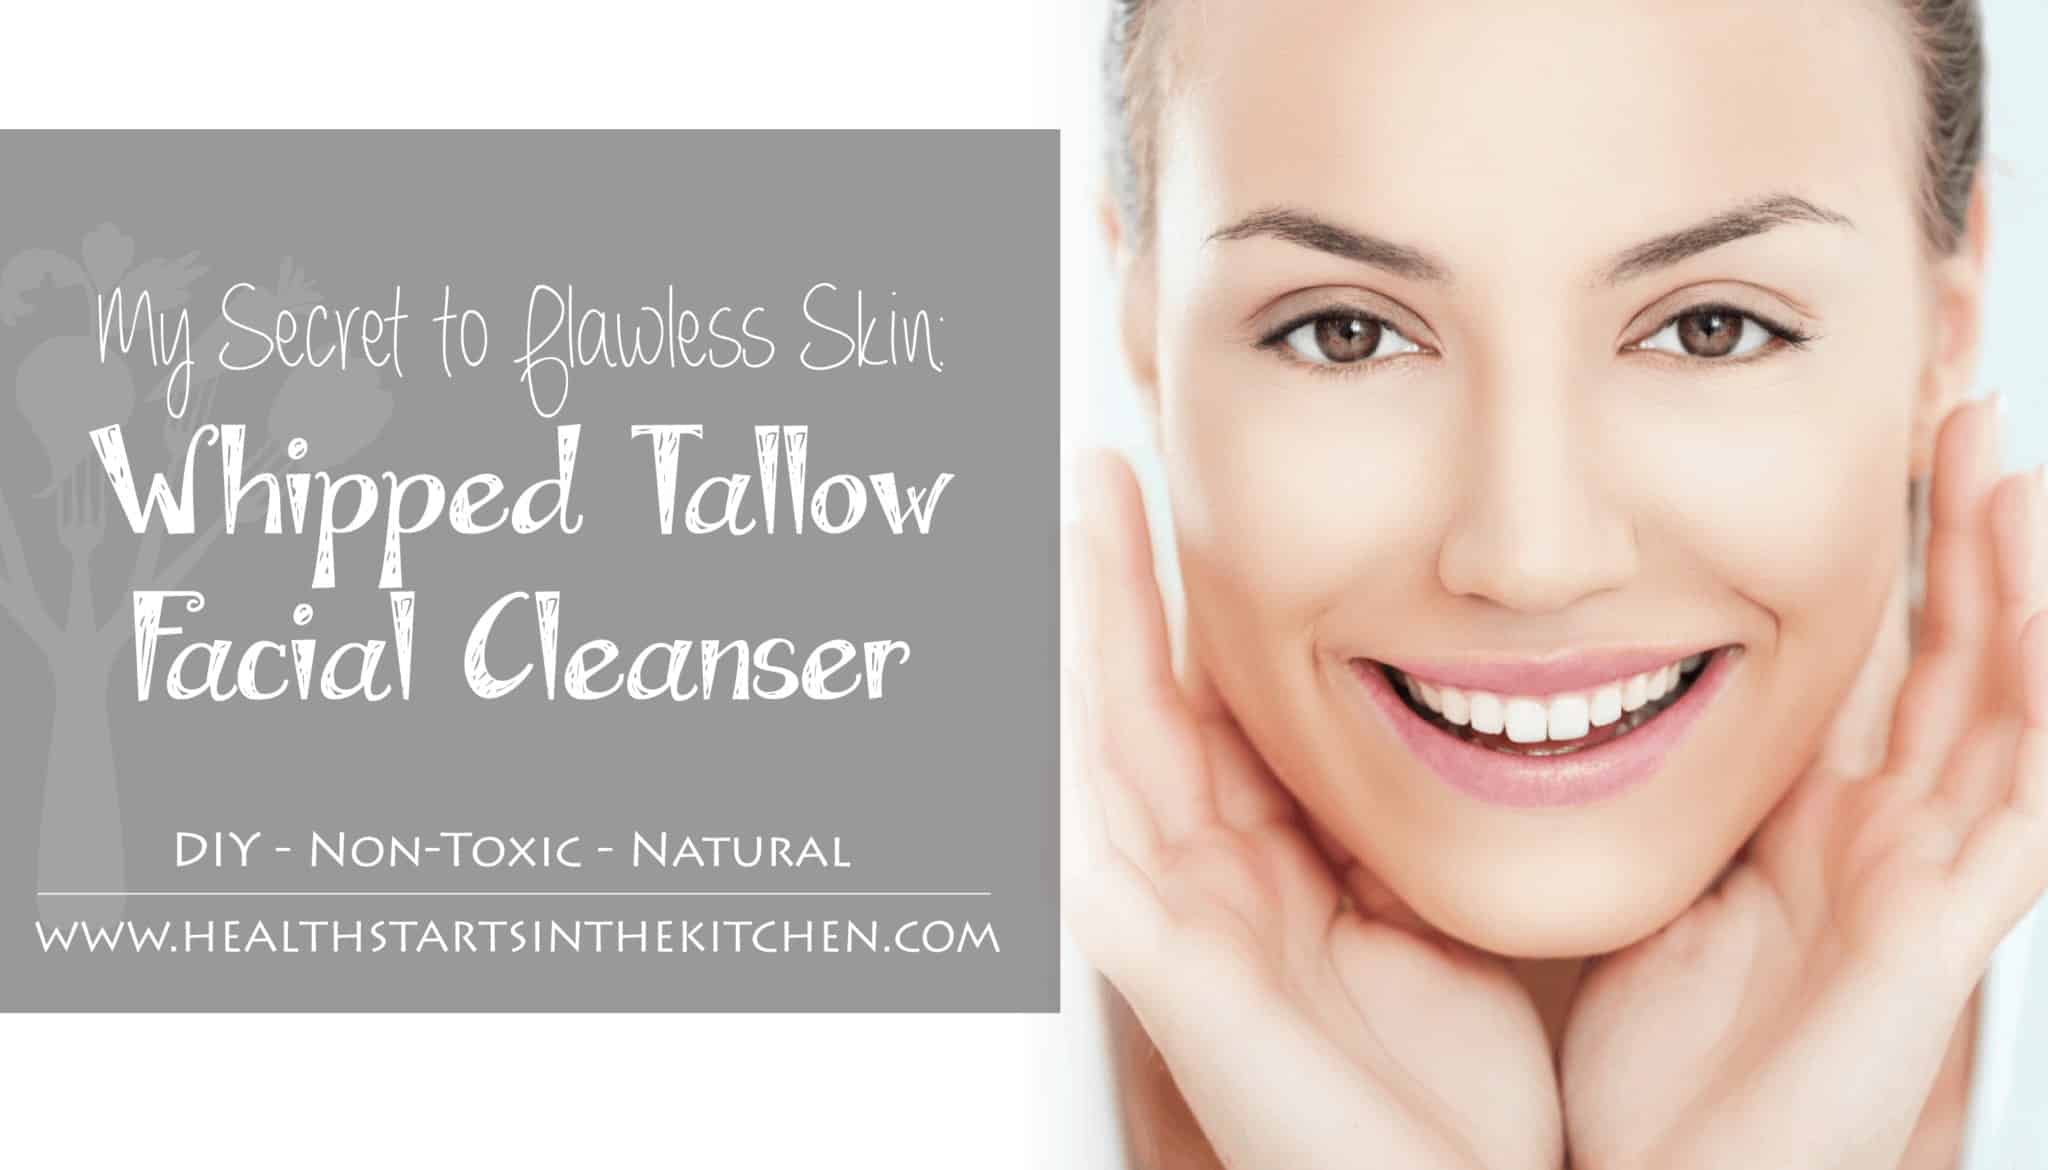 My Secret to Flawless Skin: Whipped Tallow Facial Cleanser